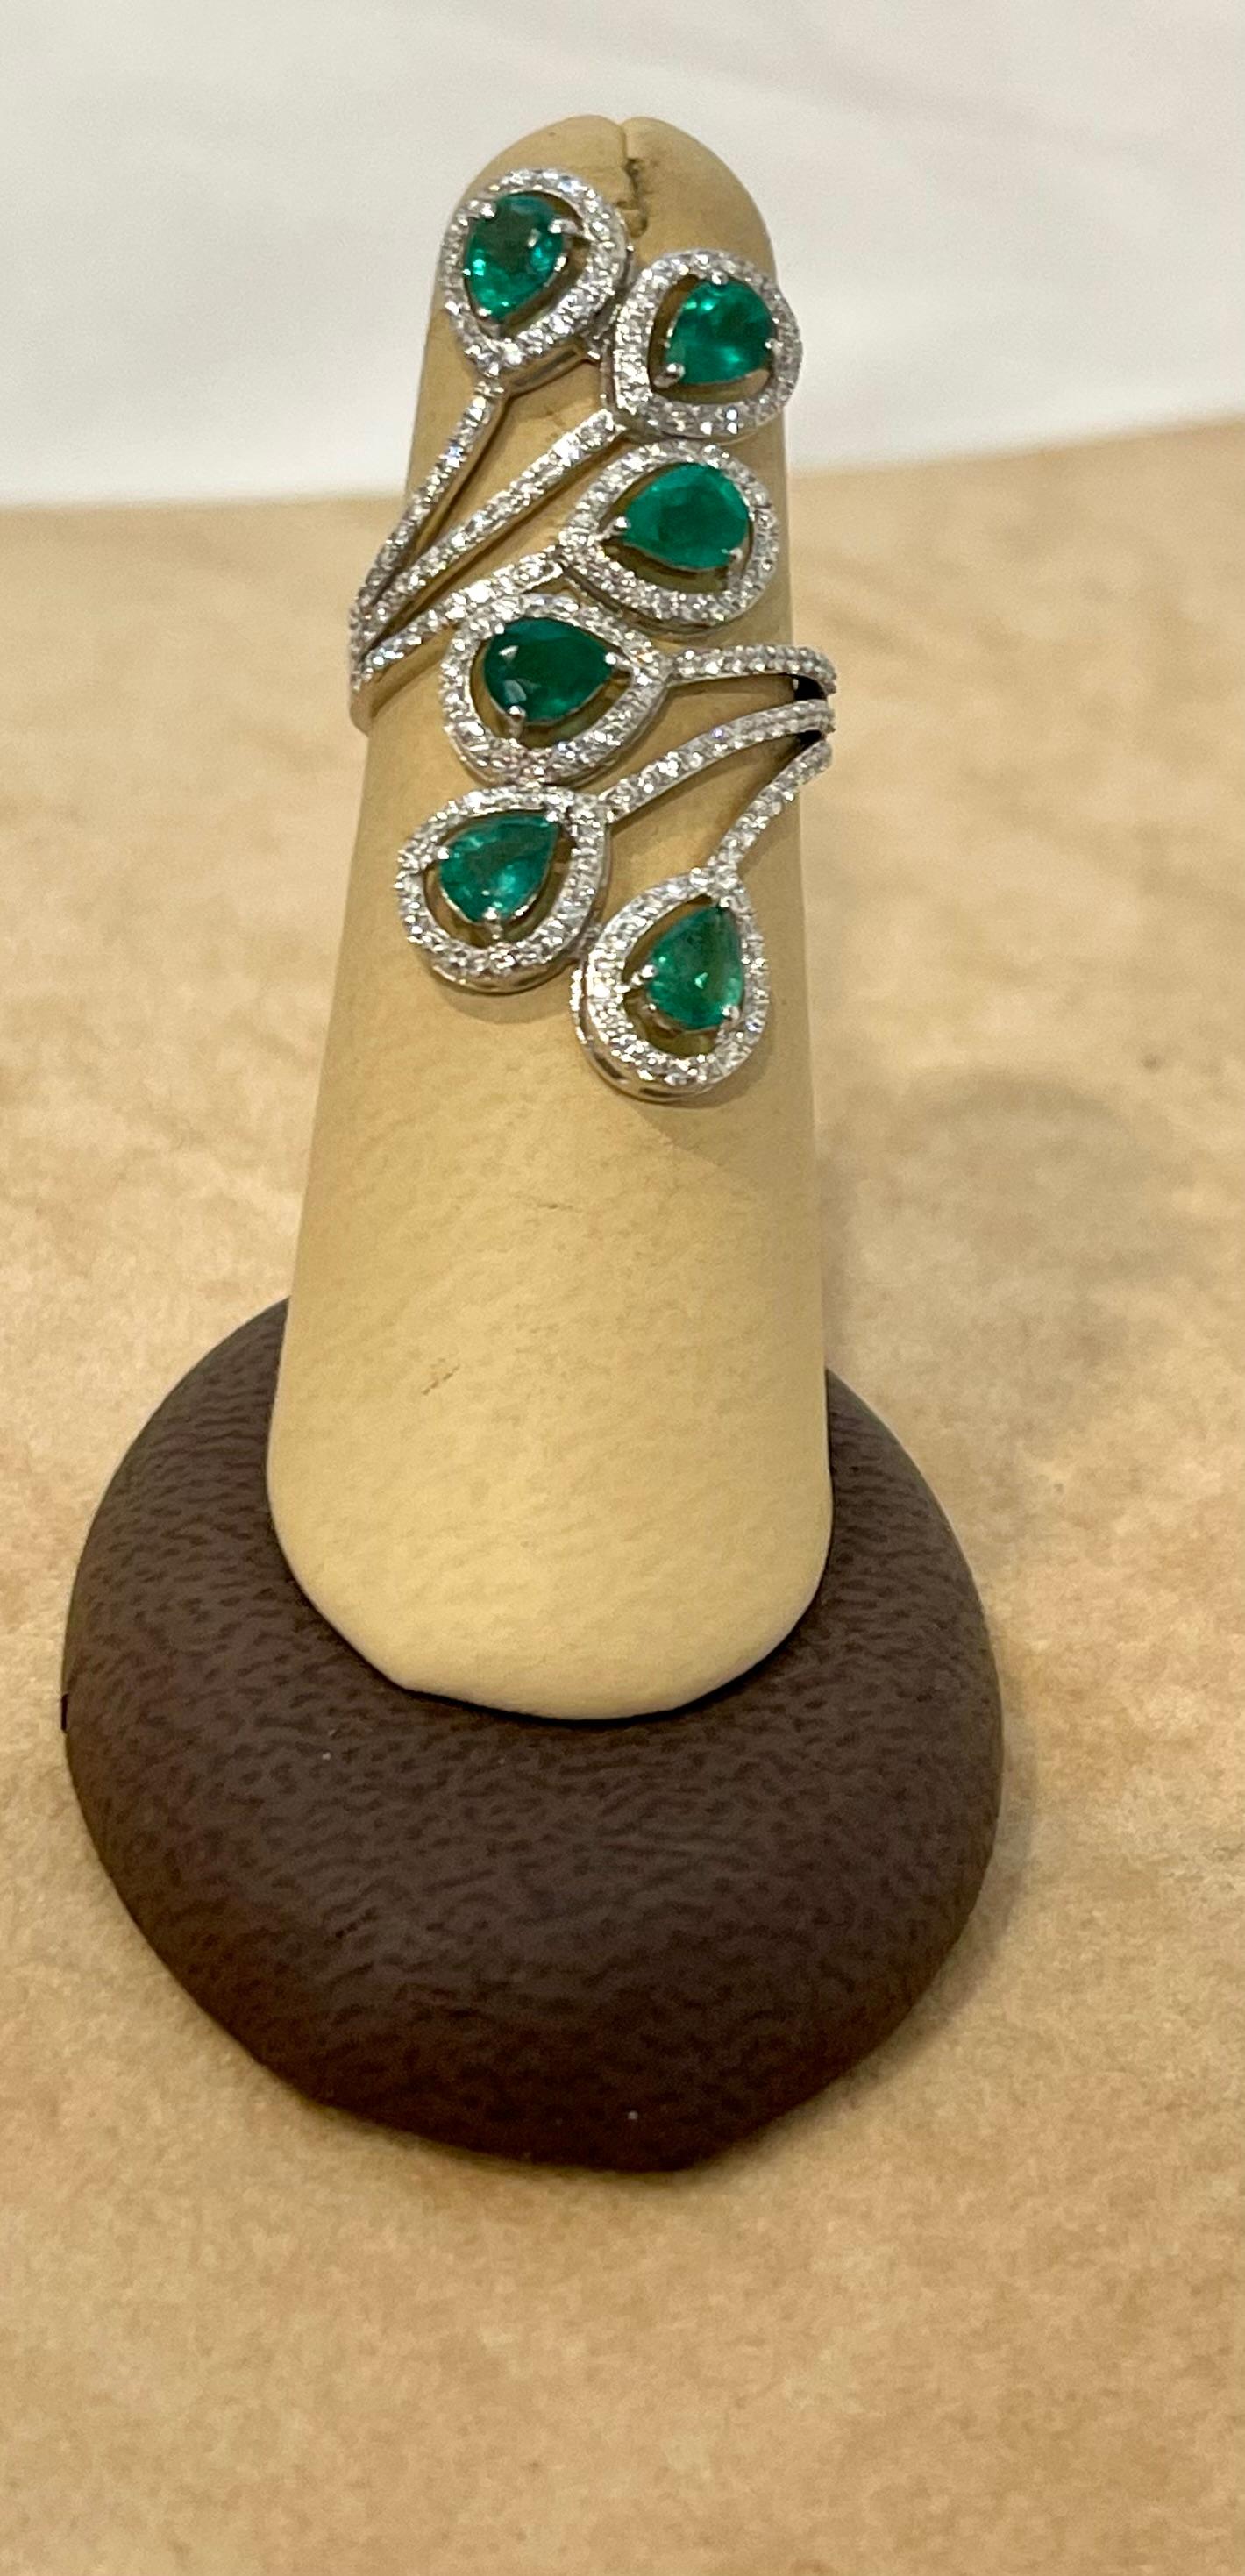 Women's 3 Ct Natural  Zambian Emeralds and 1.2 Ct Diamond Ring in 14 karat White Gold For Sale